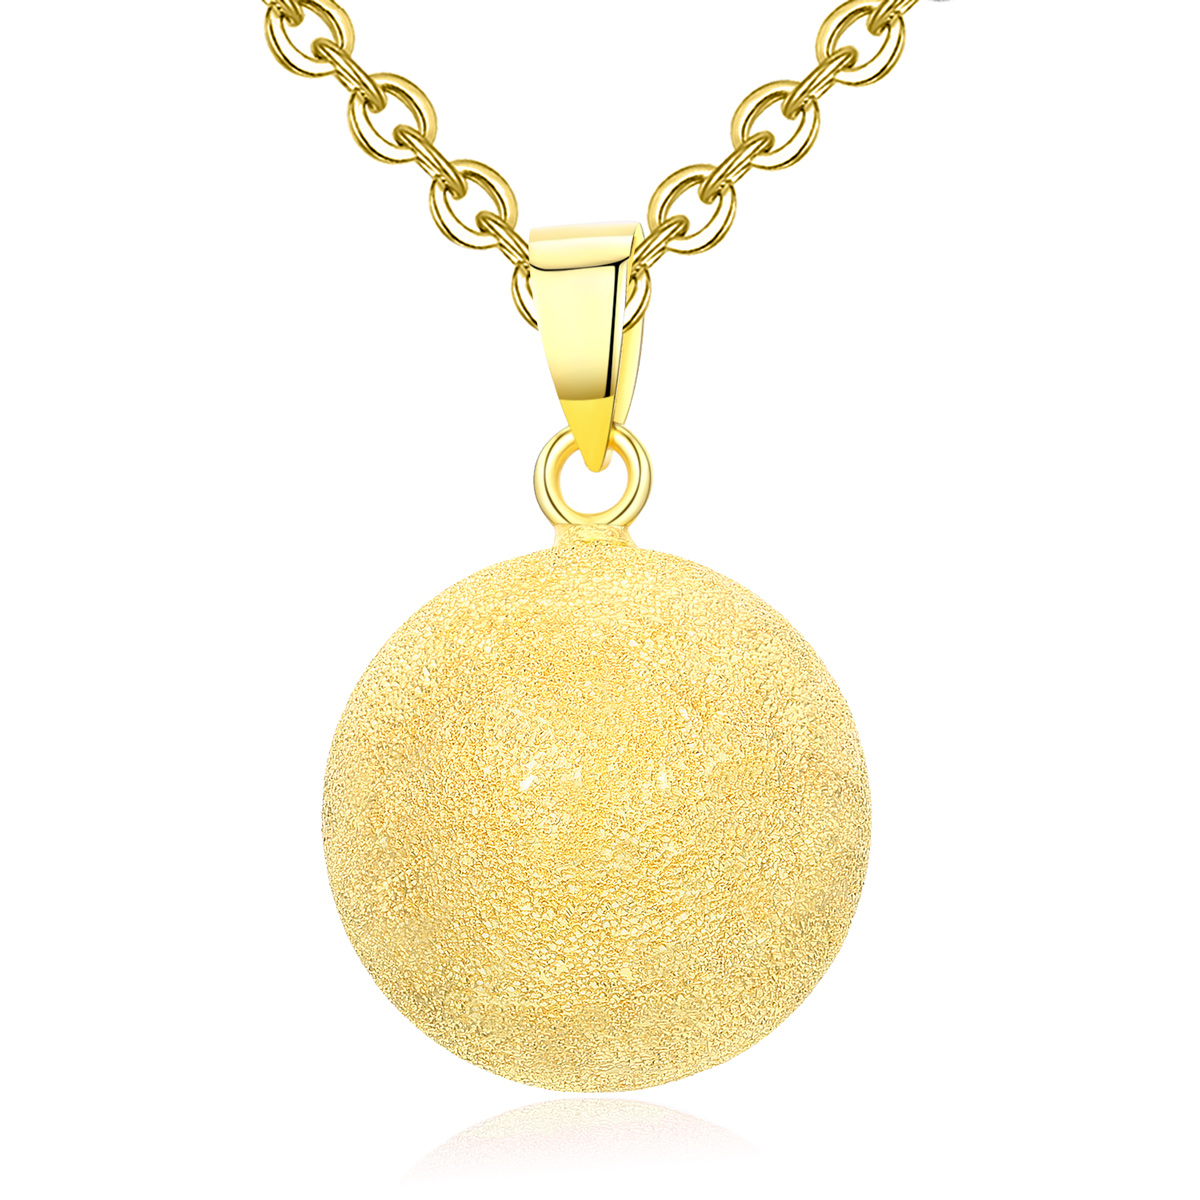 Merryshine Jewelry Matte Gold Plated Harmony Mexican Bola De Grossesse Ball Pregnancy Necklace